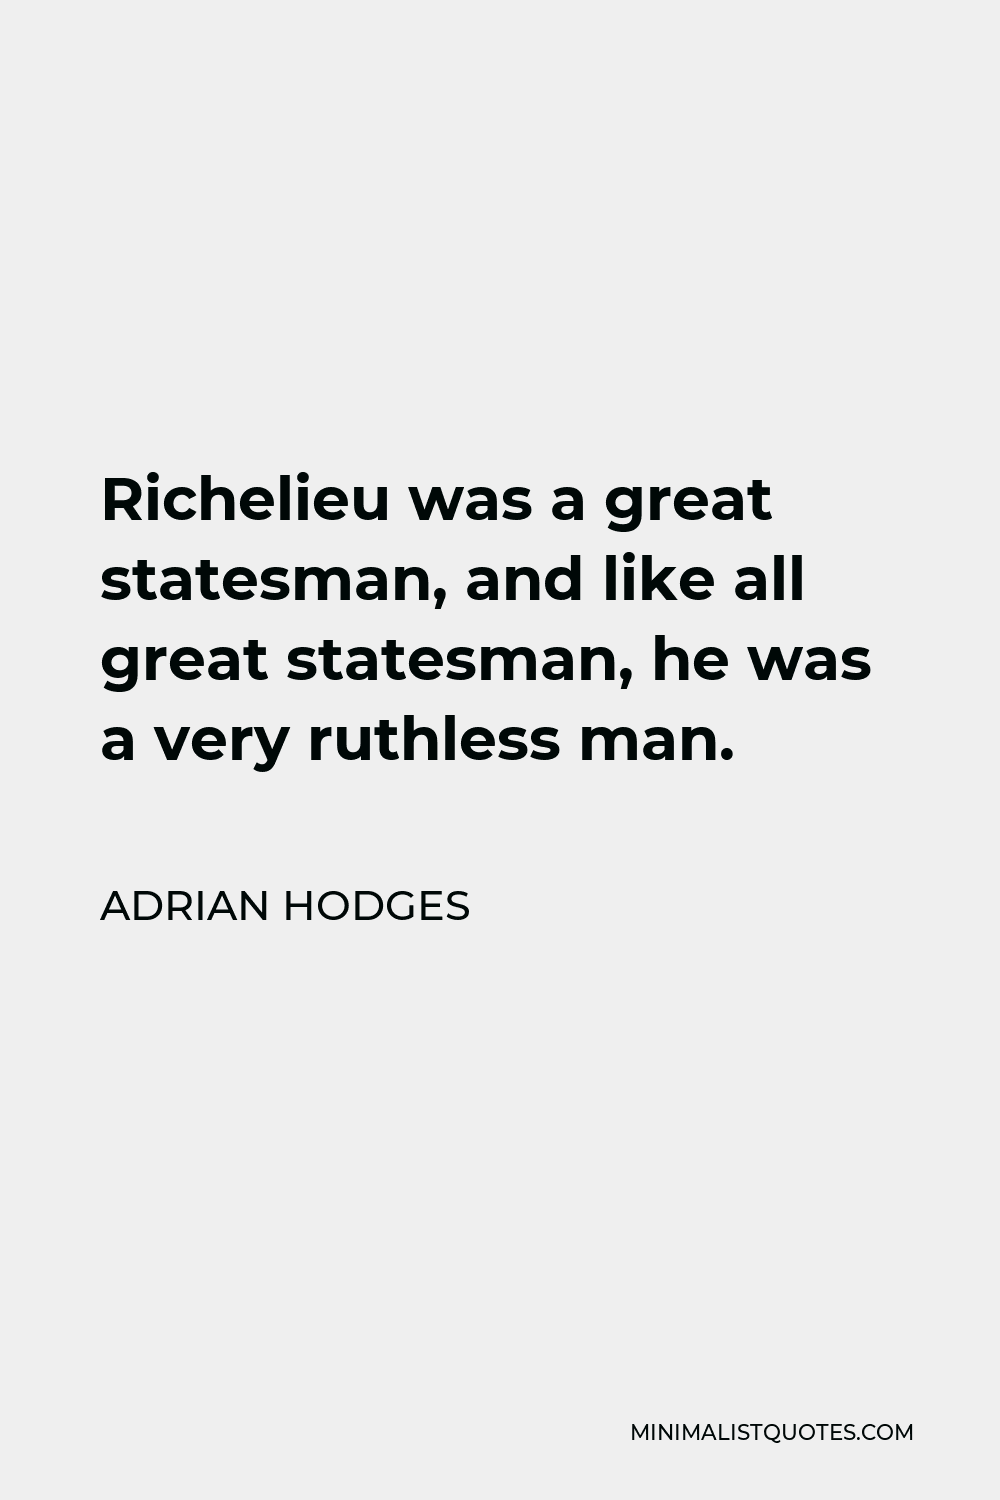 Adrian Hodges Quote - Richelieu was a great statesman, and like all great statesman, he was a very ruthless man.